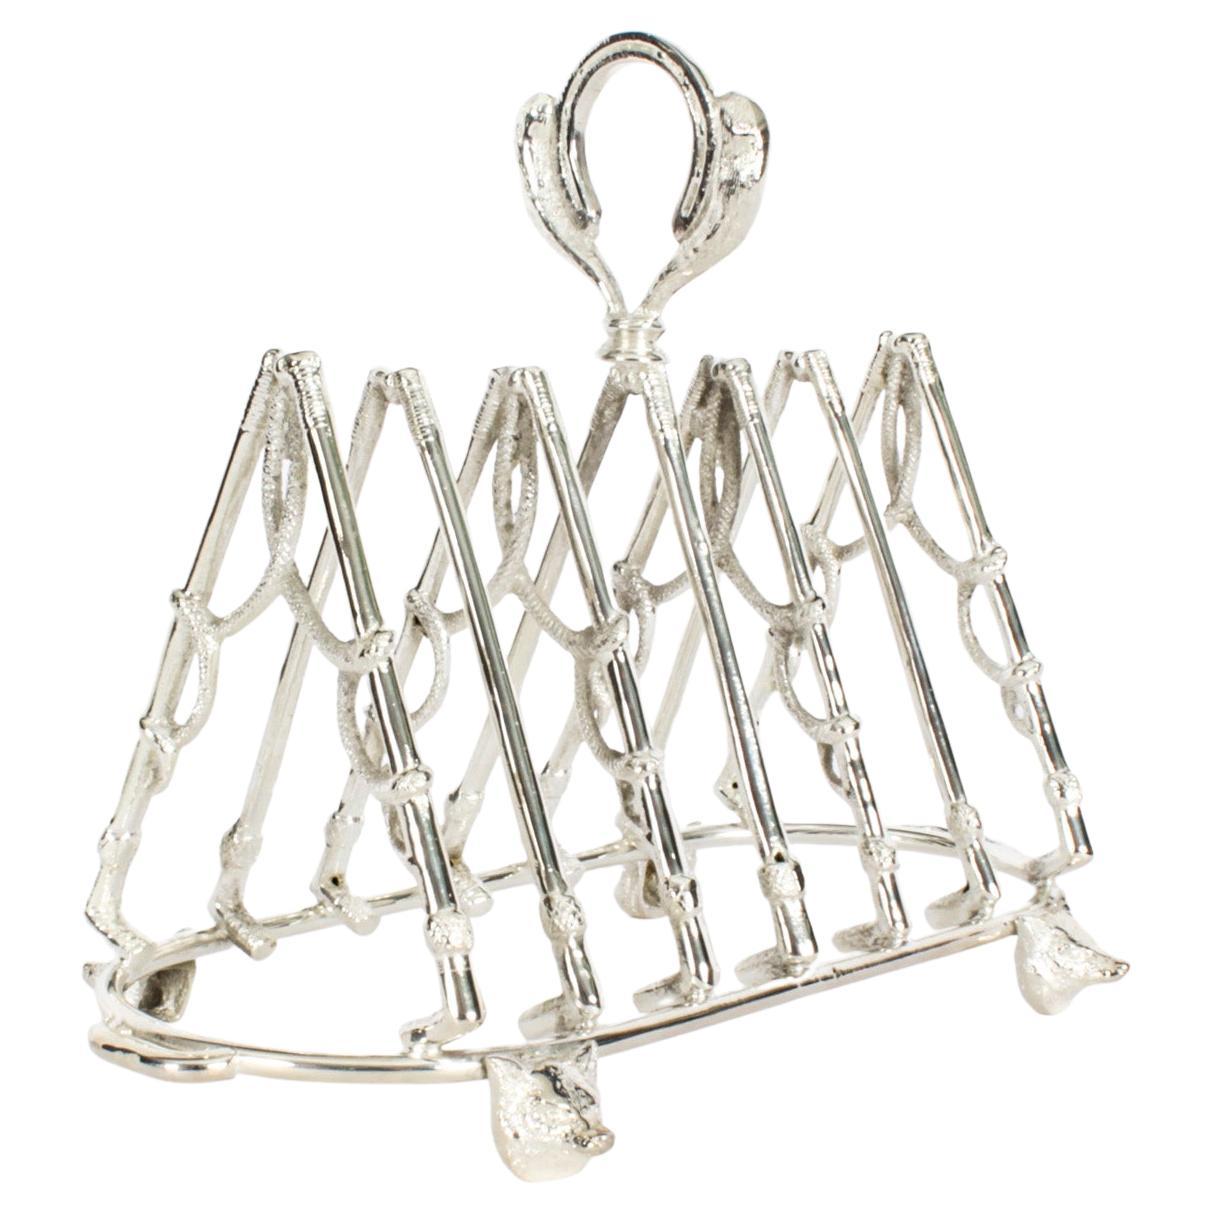 Vintage Silver Plated Hunting Toast Rack 20th Century